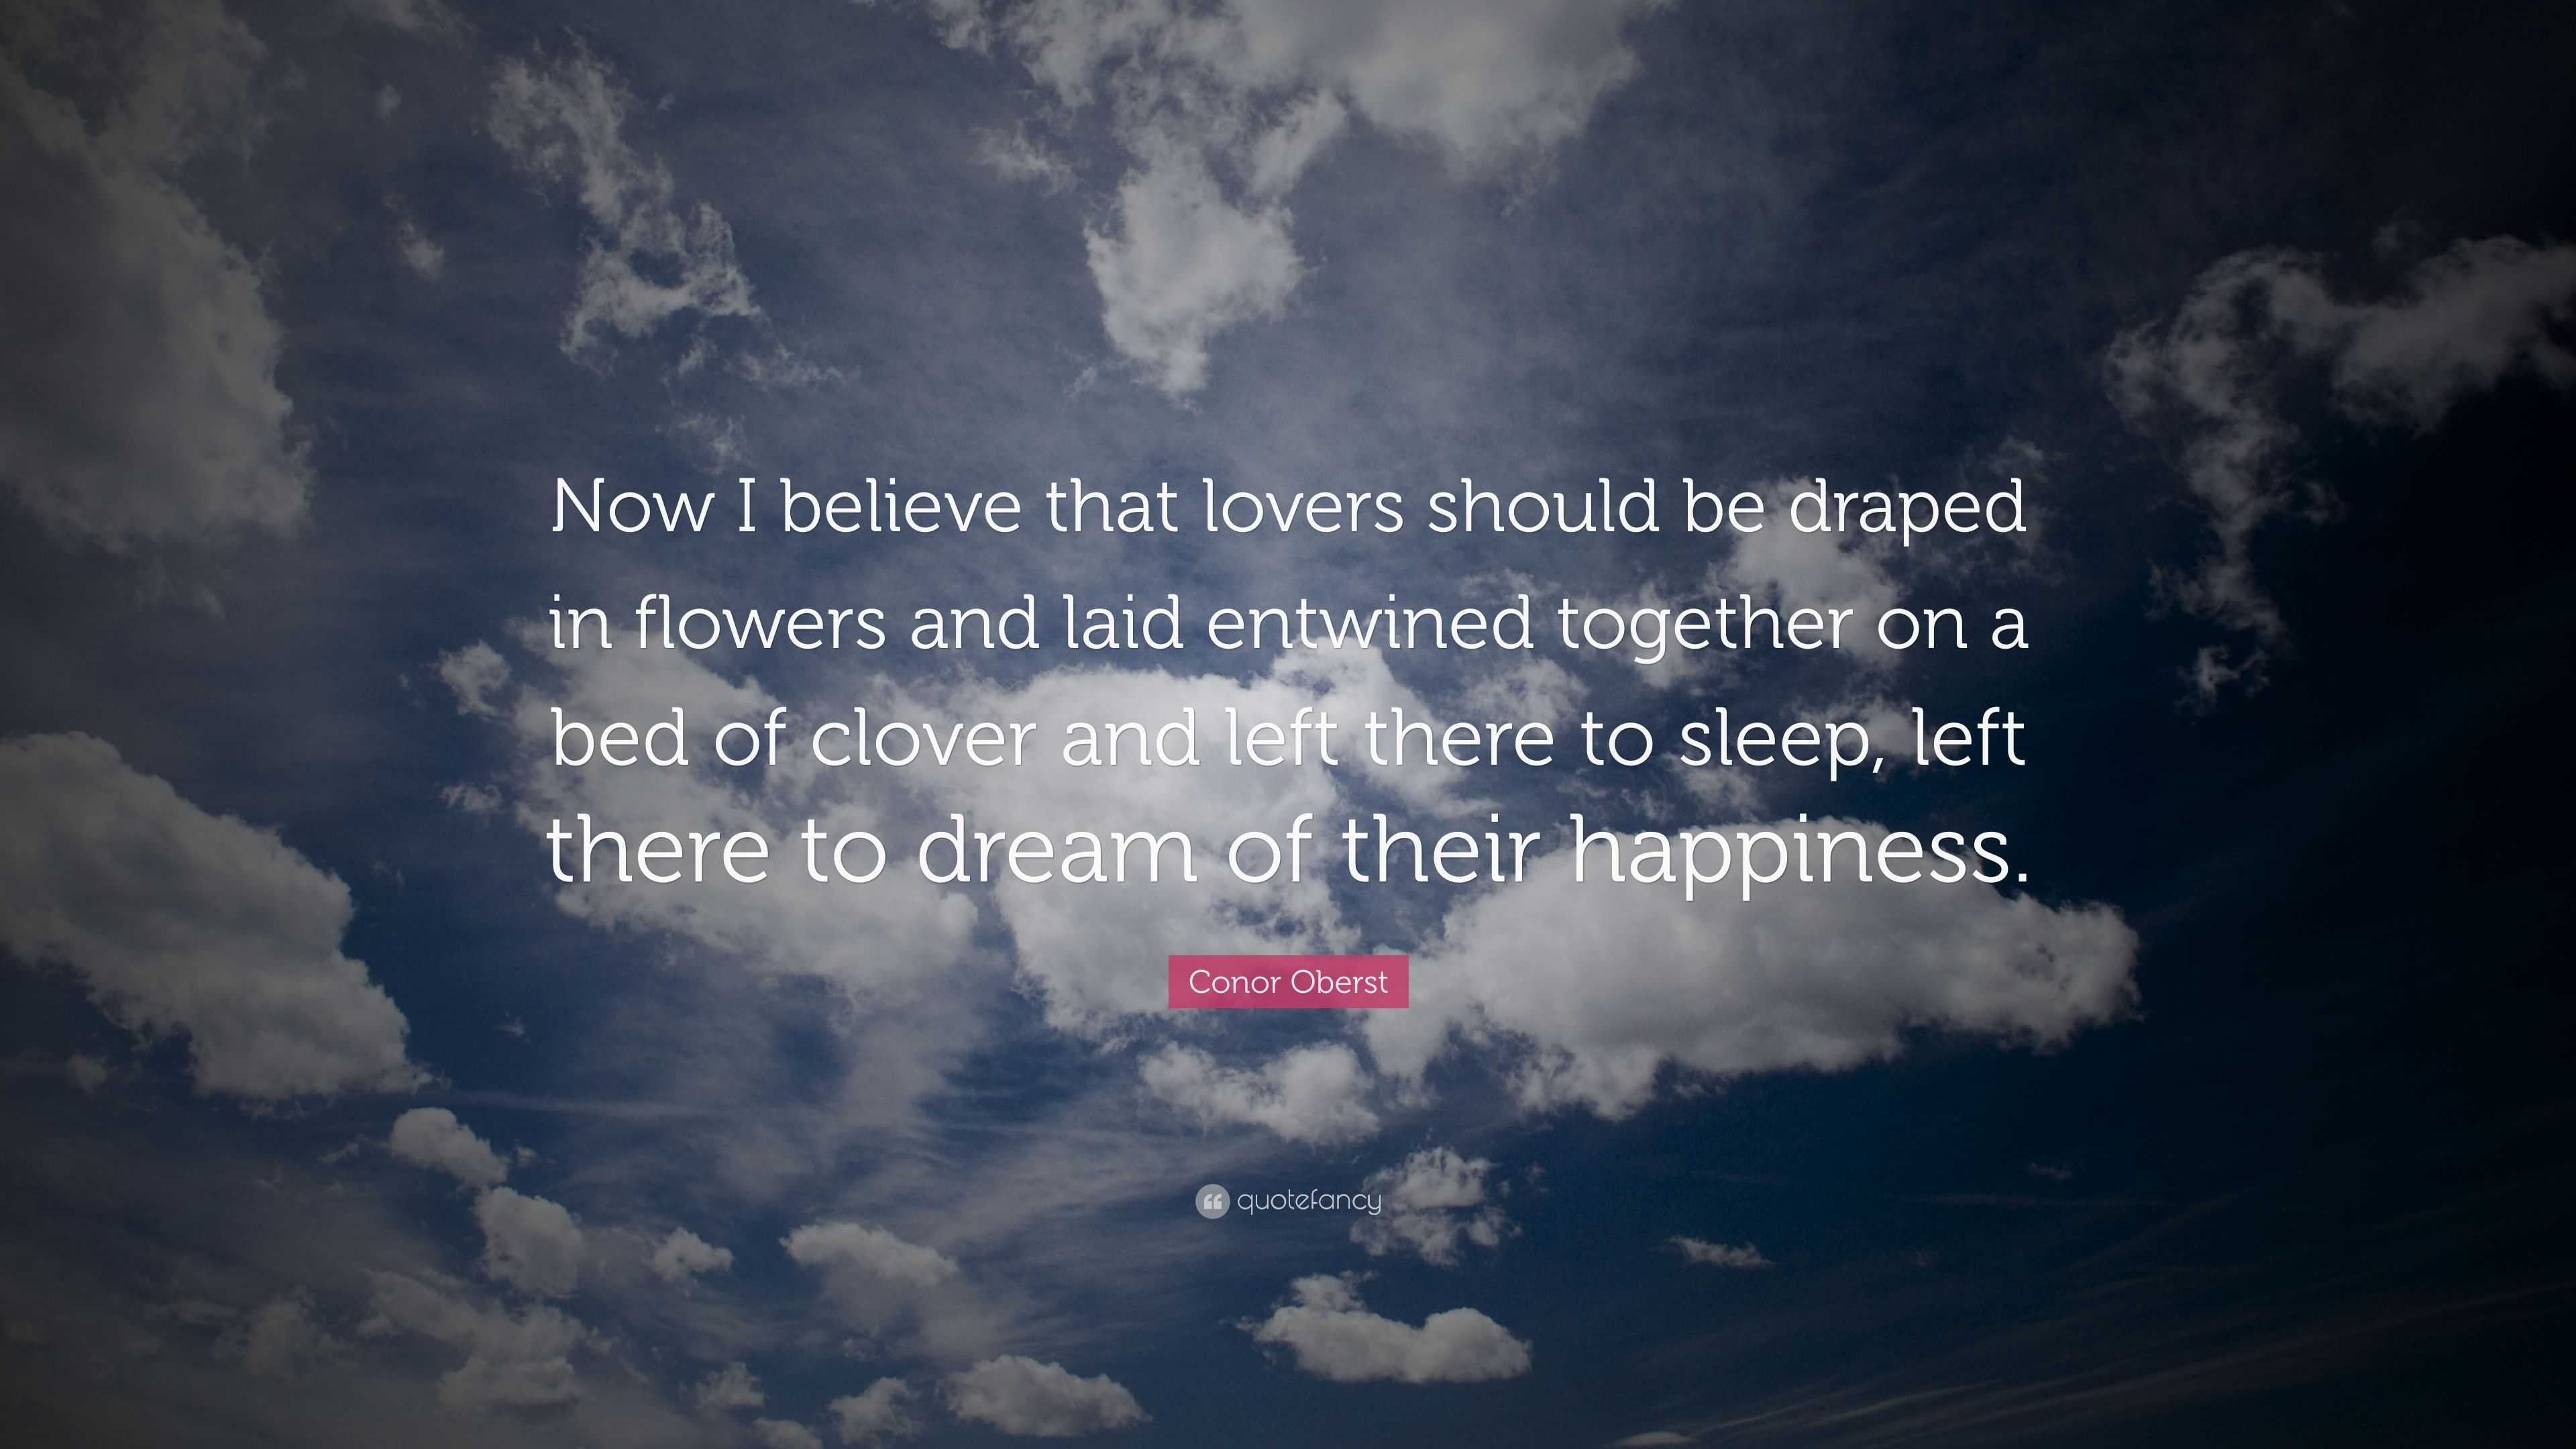 Conor Oberst Quote: “Now I believe that lovers should be draped in